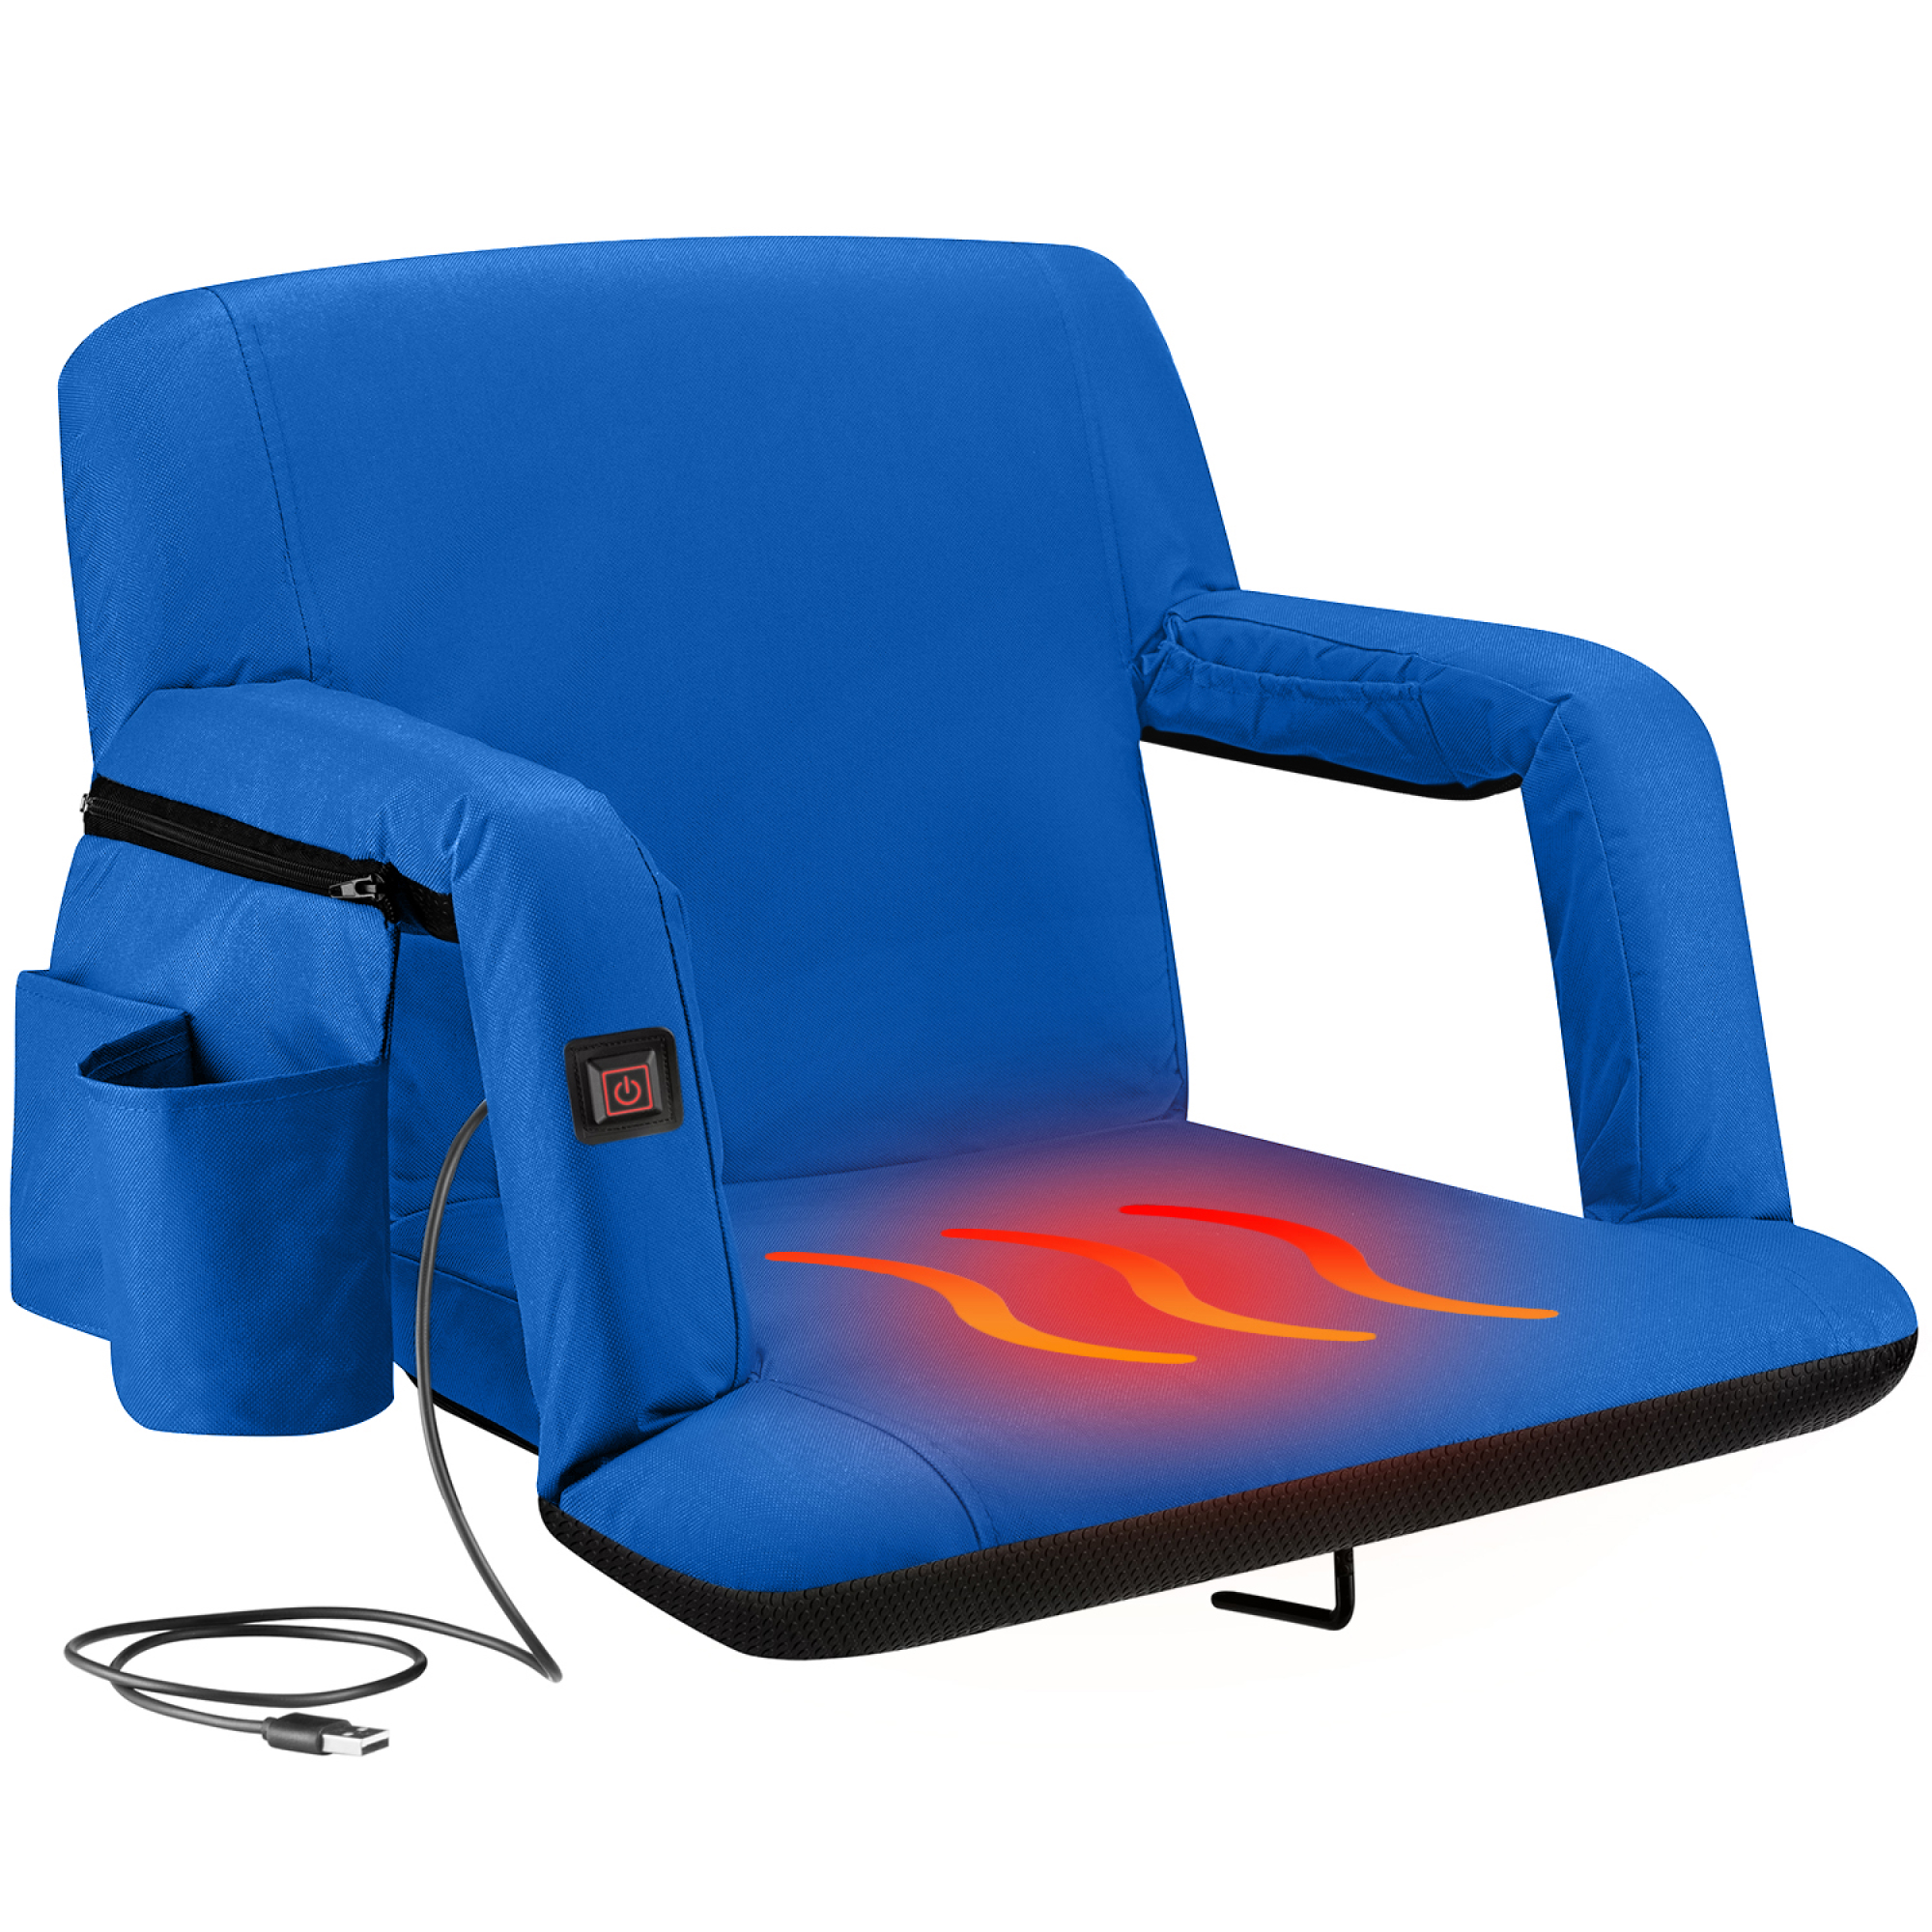 The Original Hot Seat, Dual Heated Bleacher Chair (Battery Included)